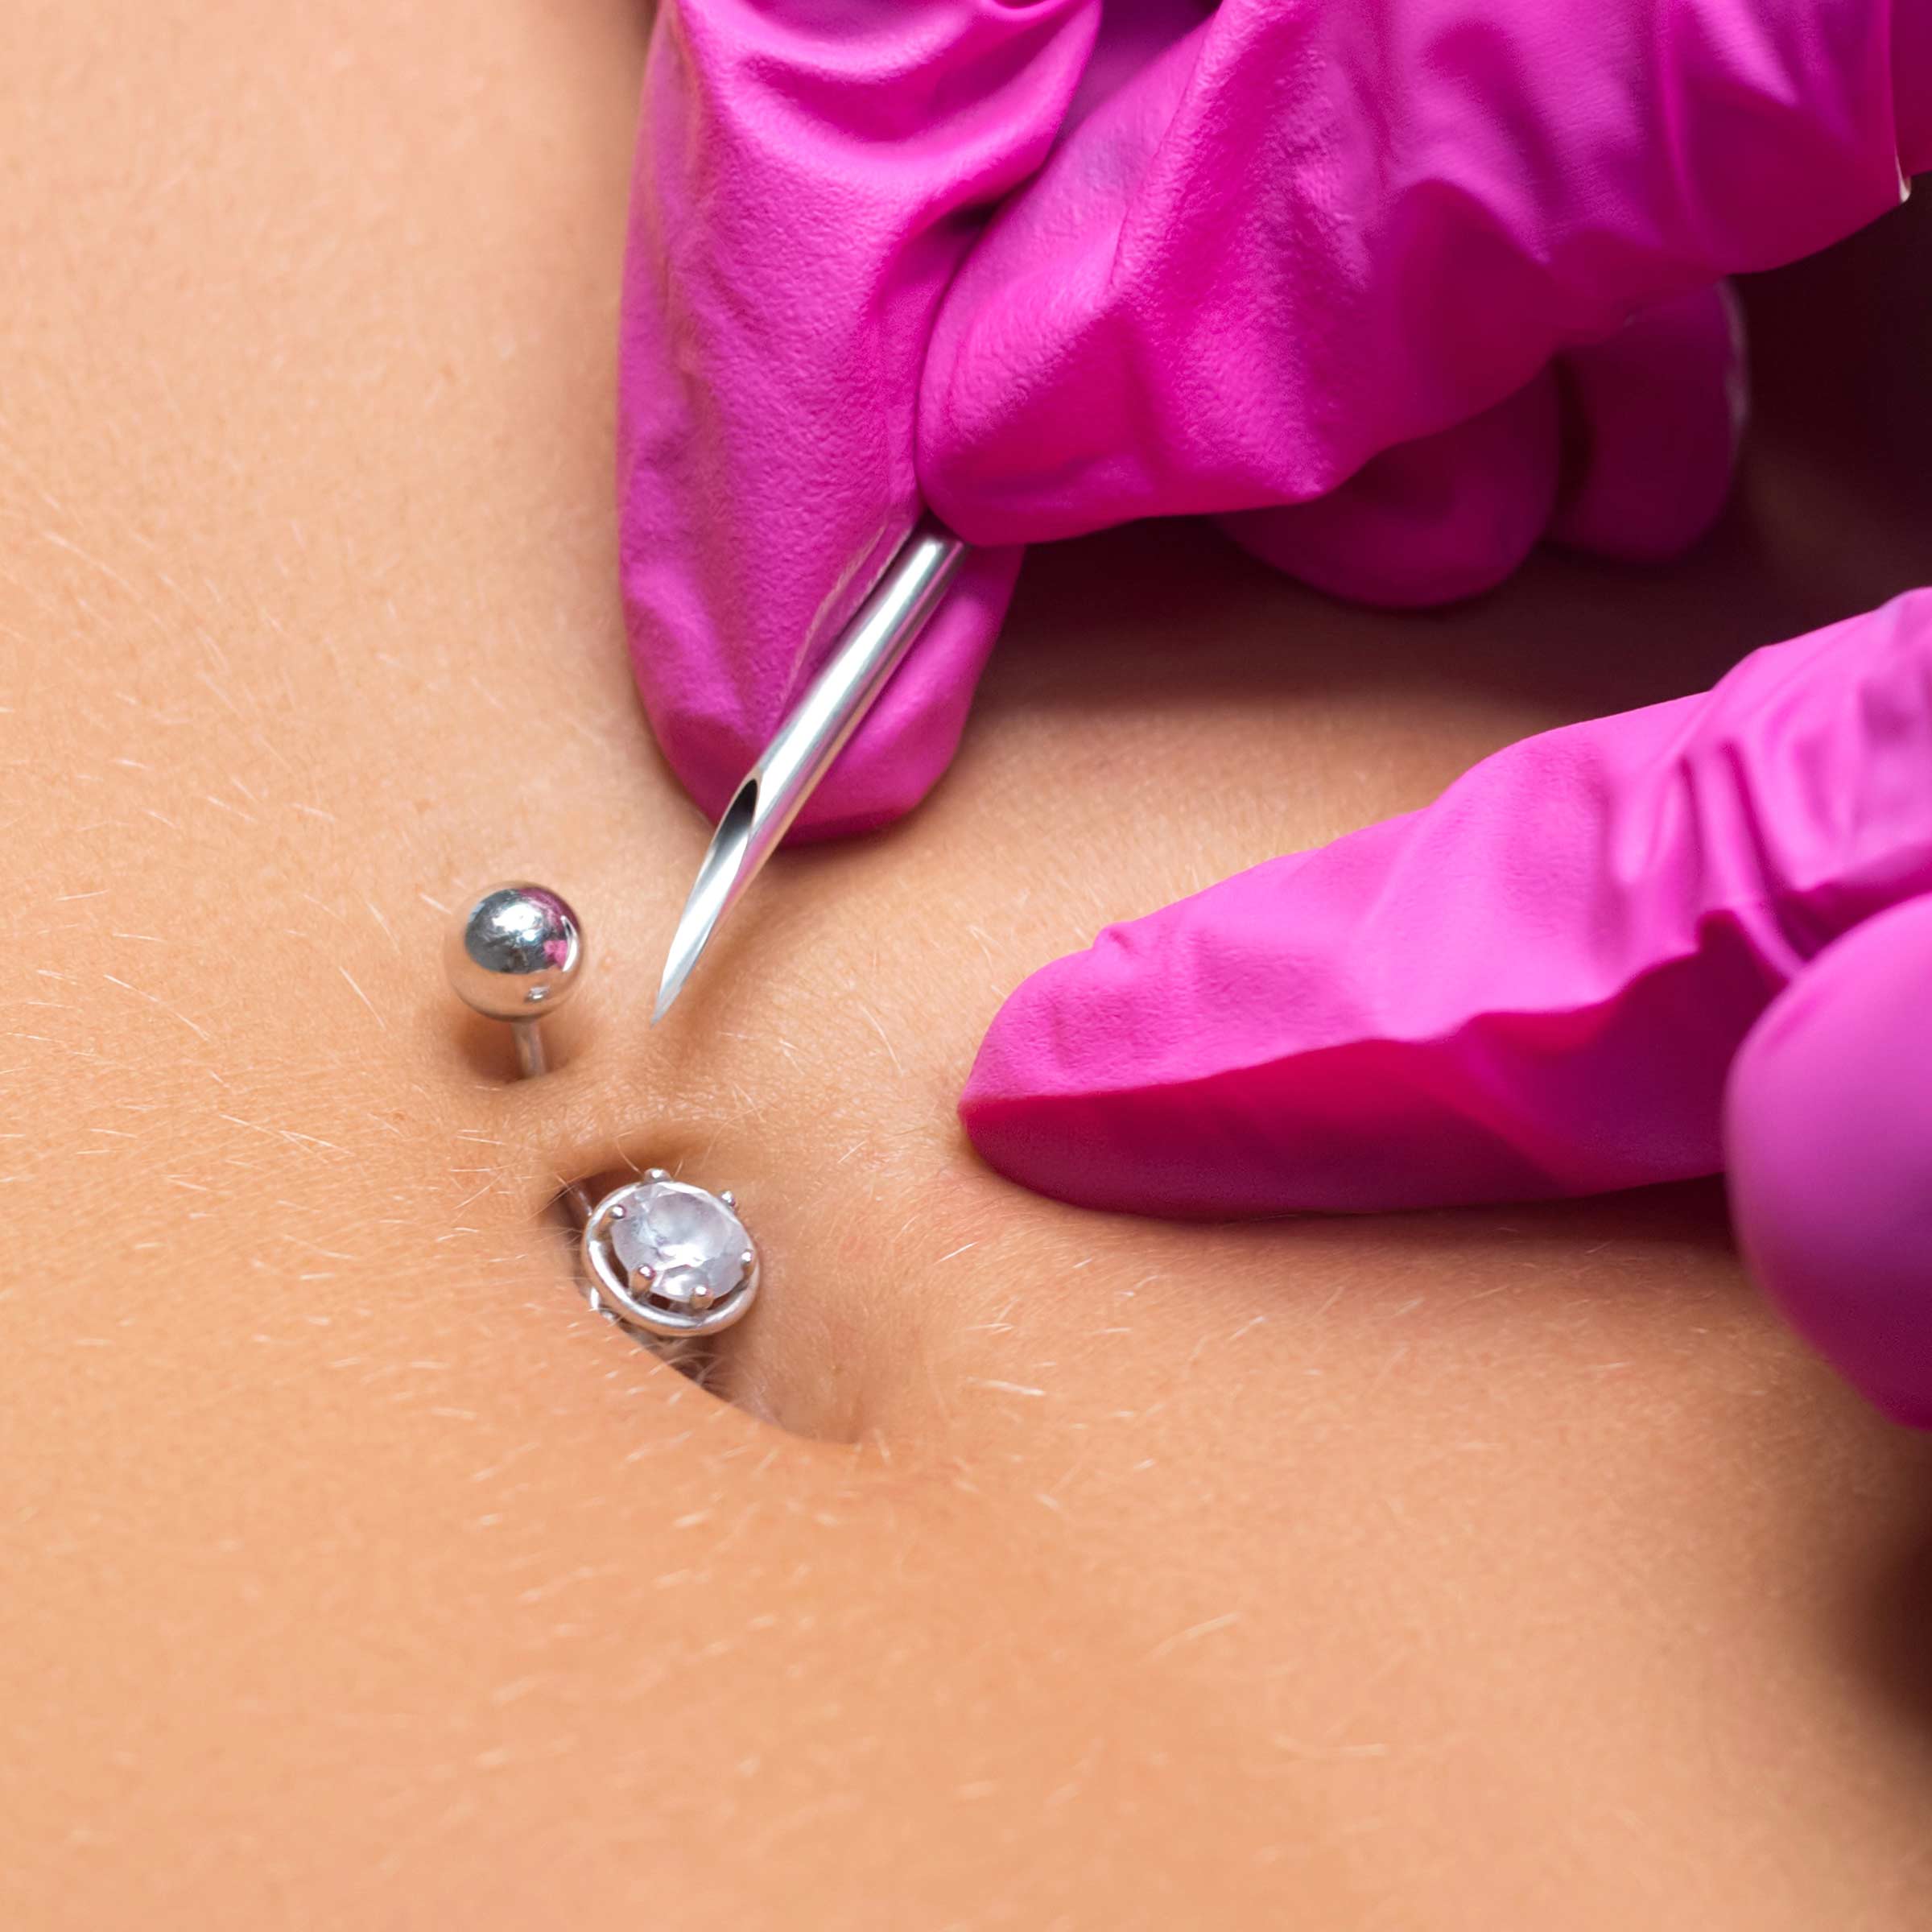 The Ultimate Guide to Belly Button Piercings